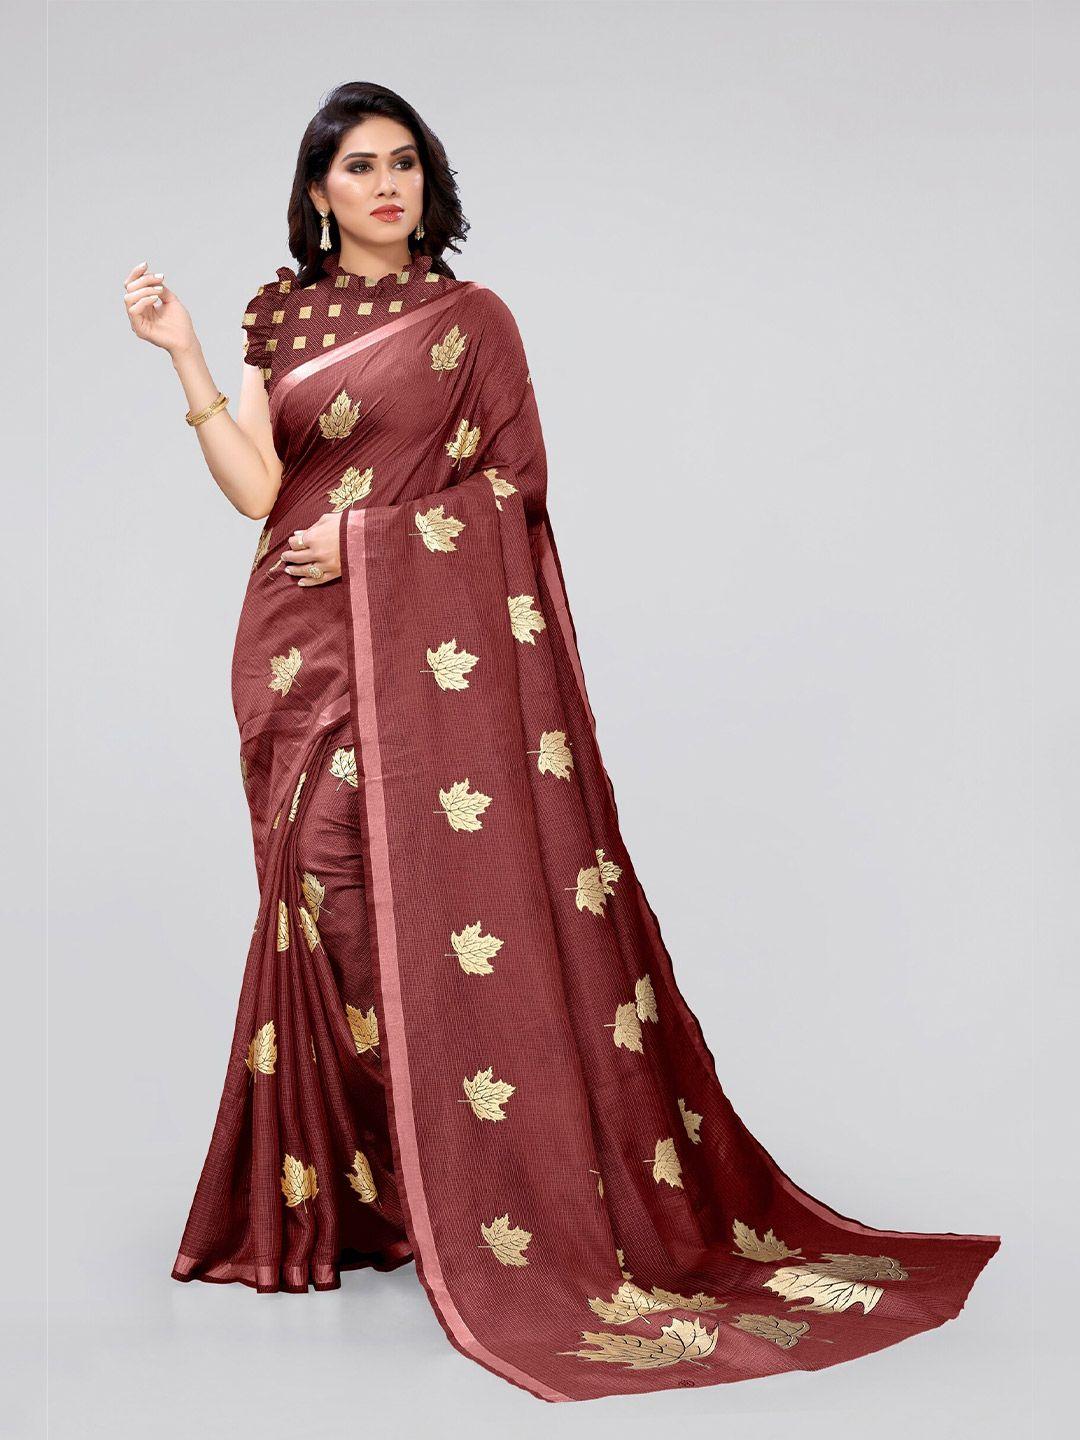 MIRCHI FASHION Maroon & Gold-Toned Floral Printed Cotton Blend Saree